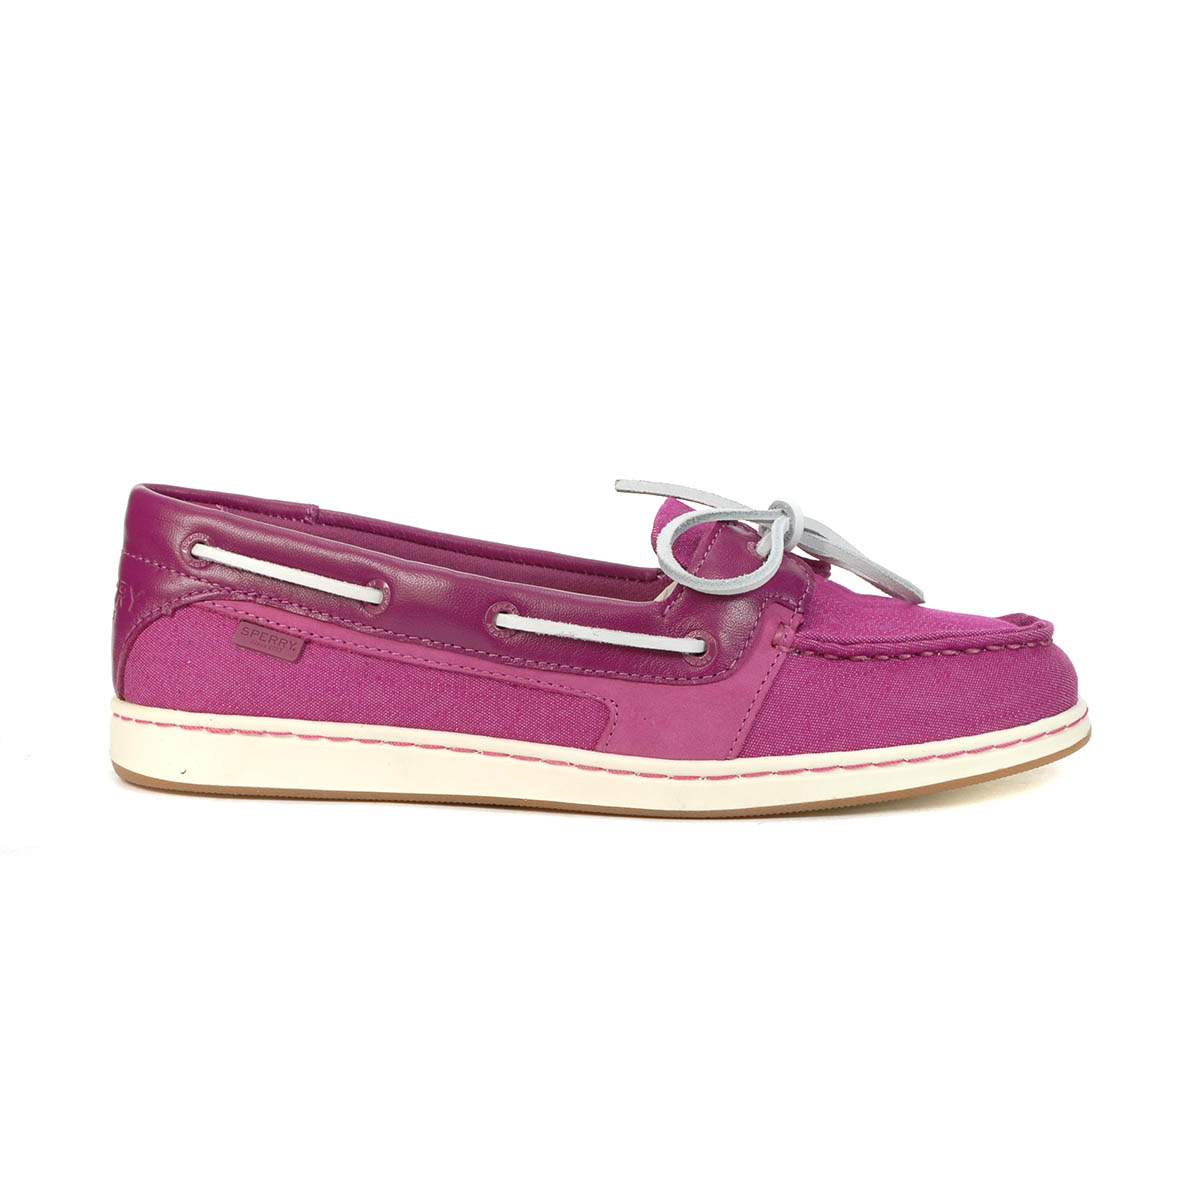 Sperry Women's Starfish Pink Boat Shoes STS87330